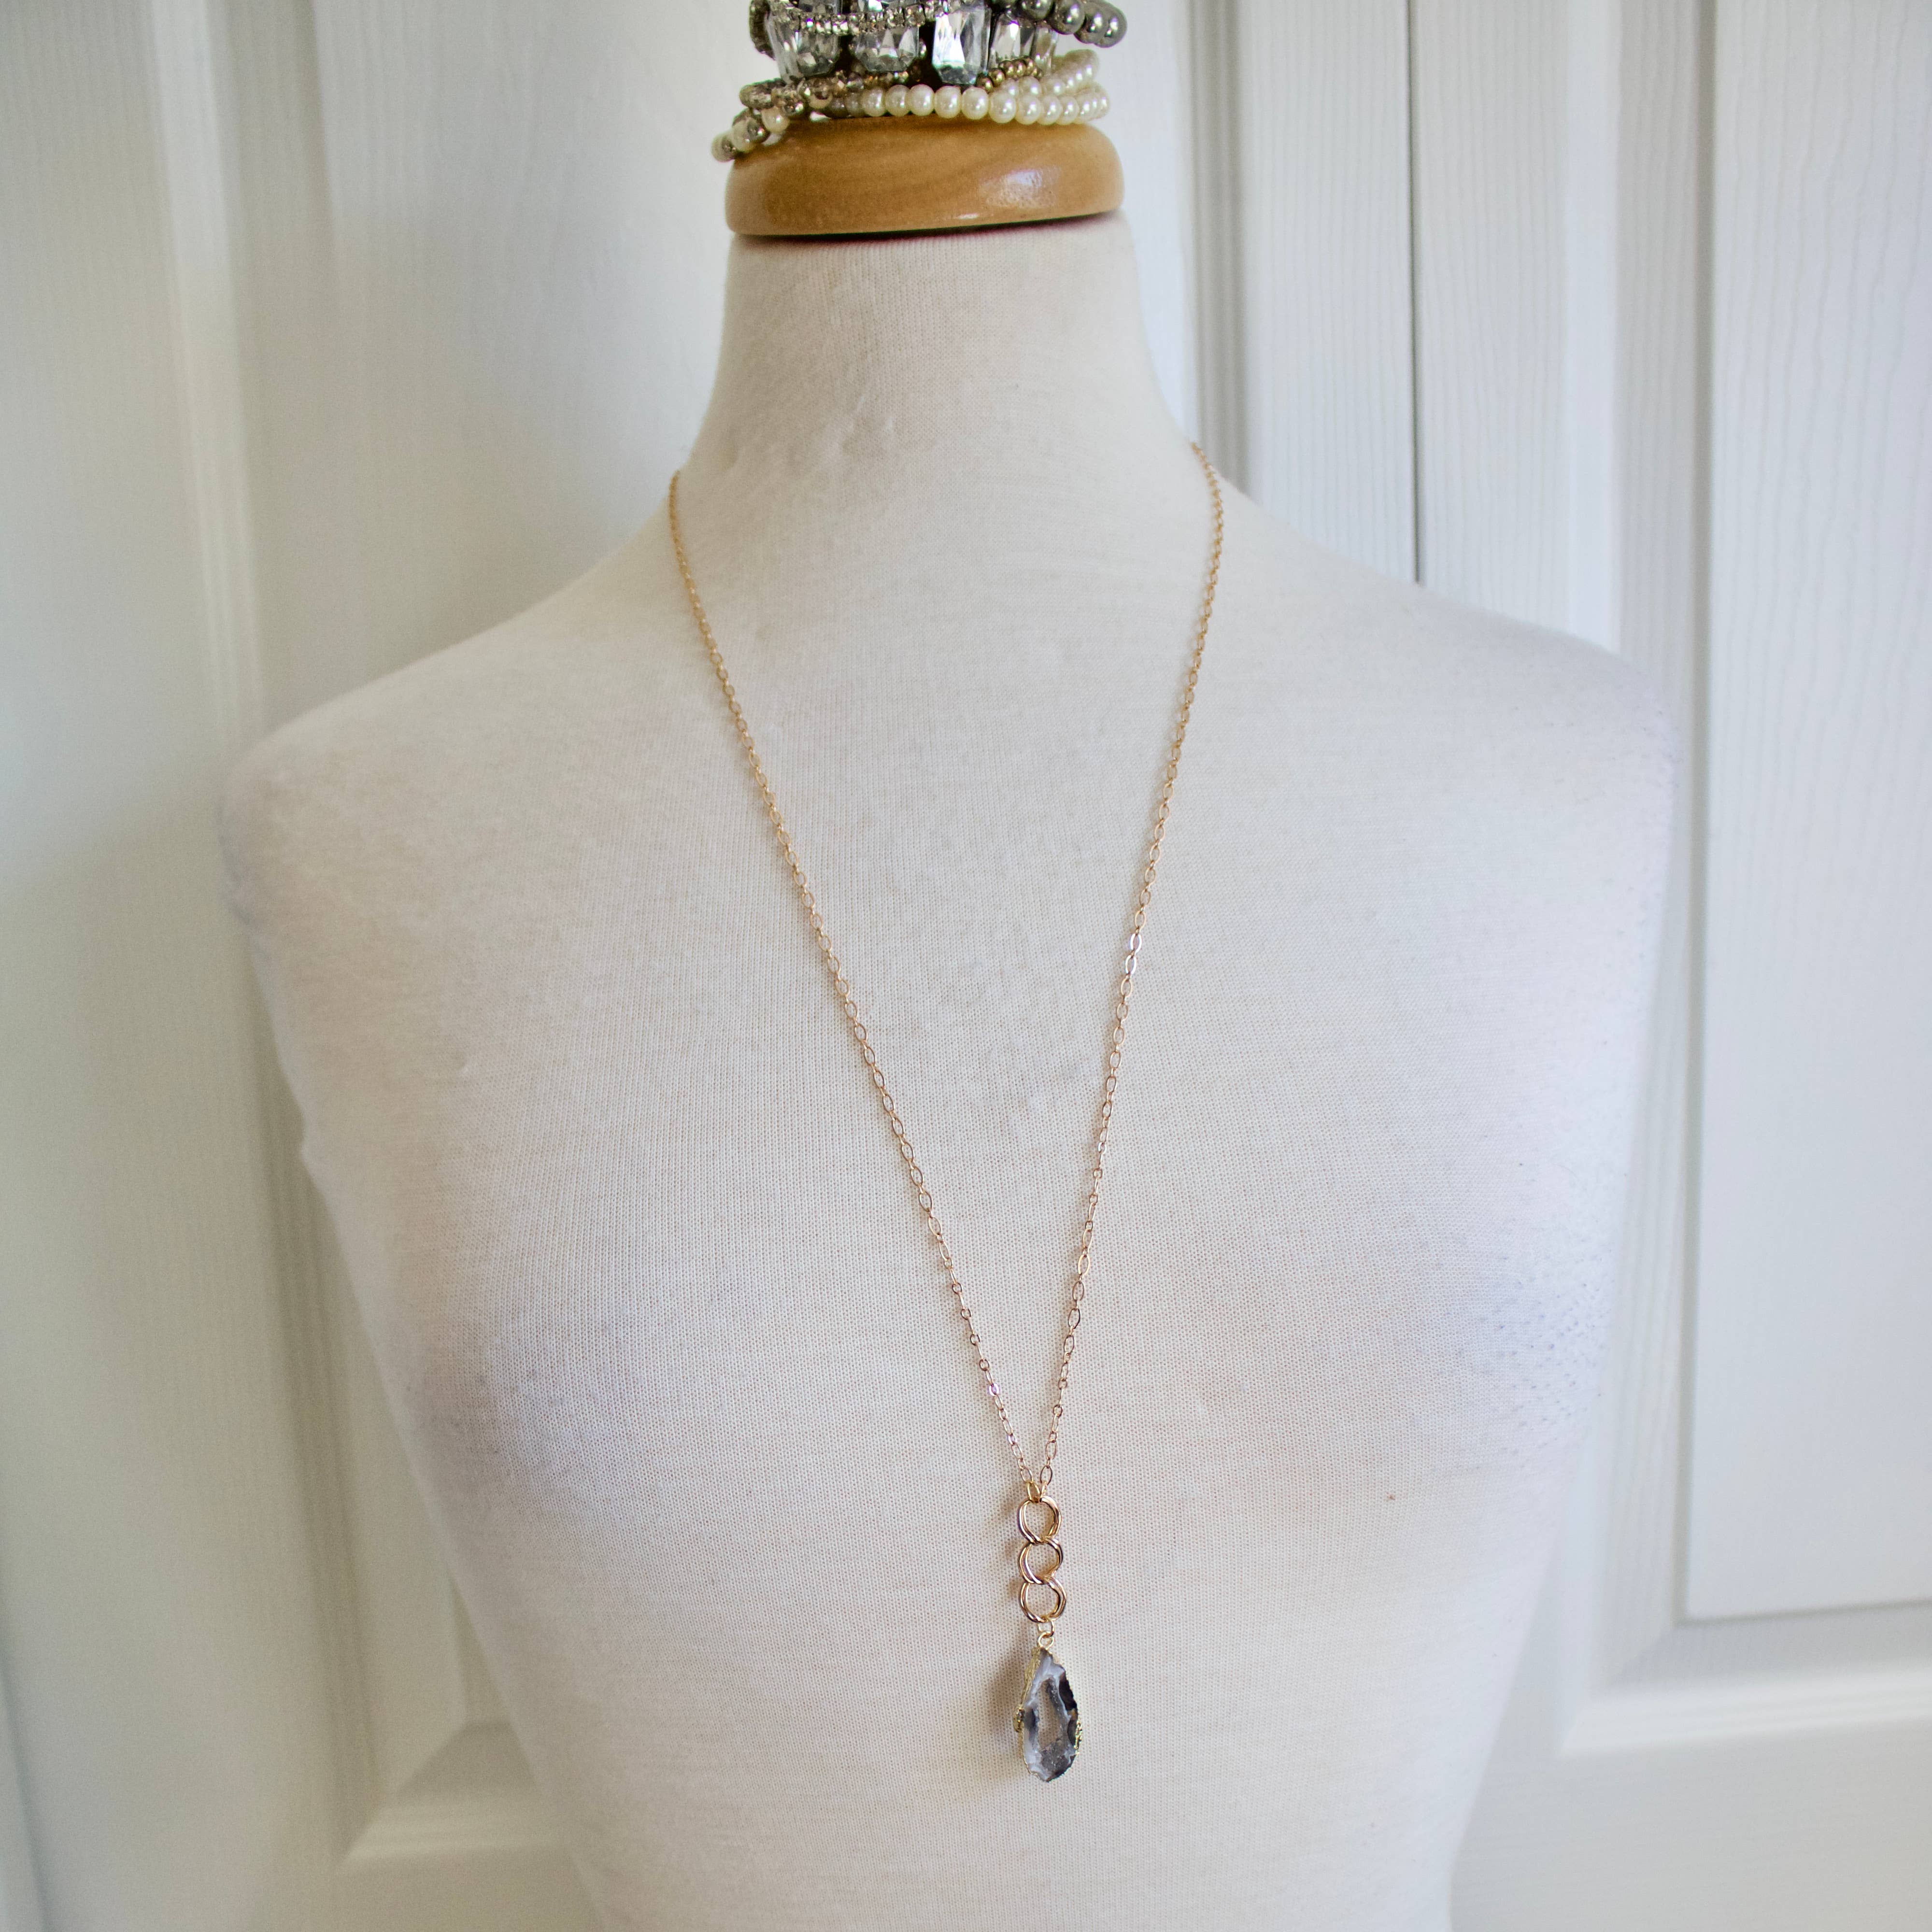 TISH jewelry - Tess Agate Slice Necklace